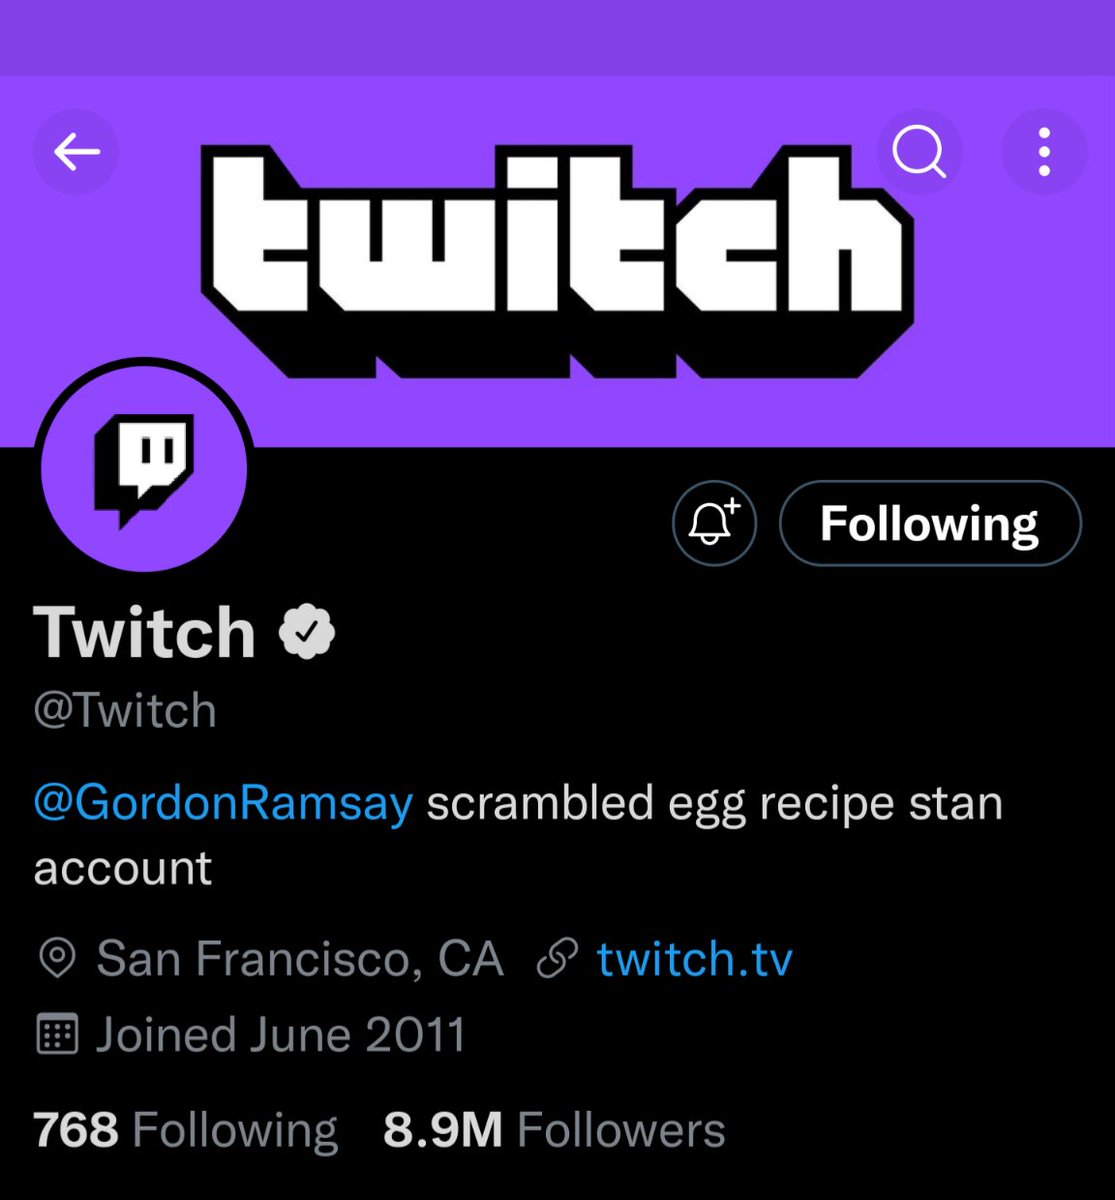 I cant believe Gordon Ramsay and Twitch are flirting rn https://t.co/3Hei0pZgVe